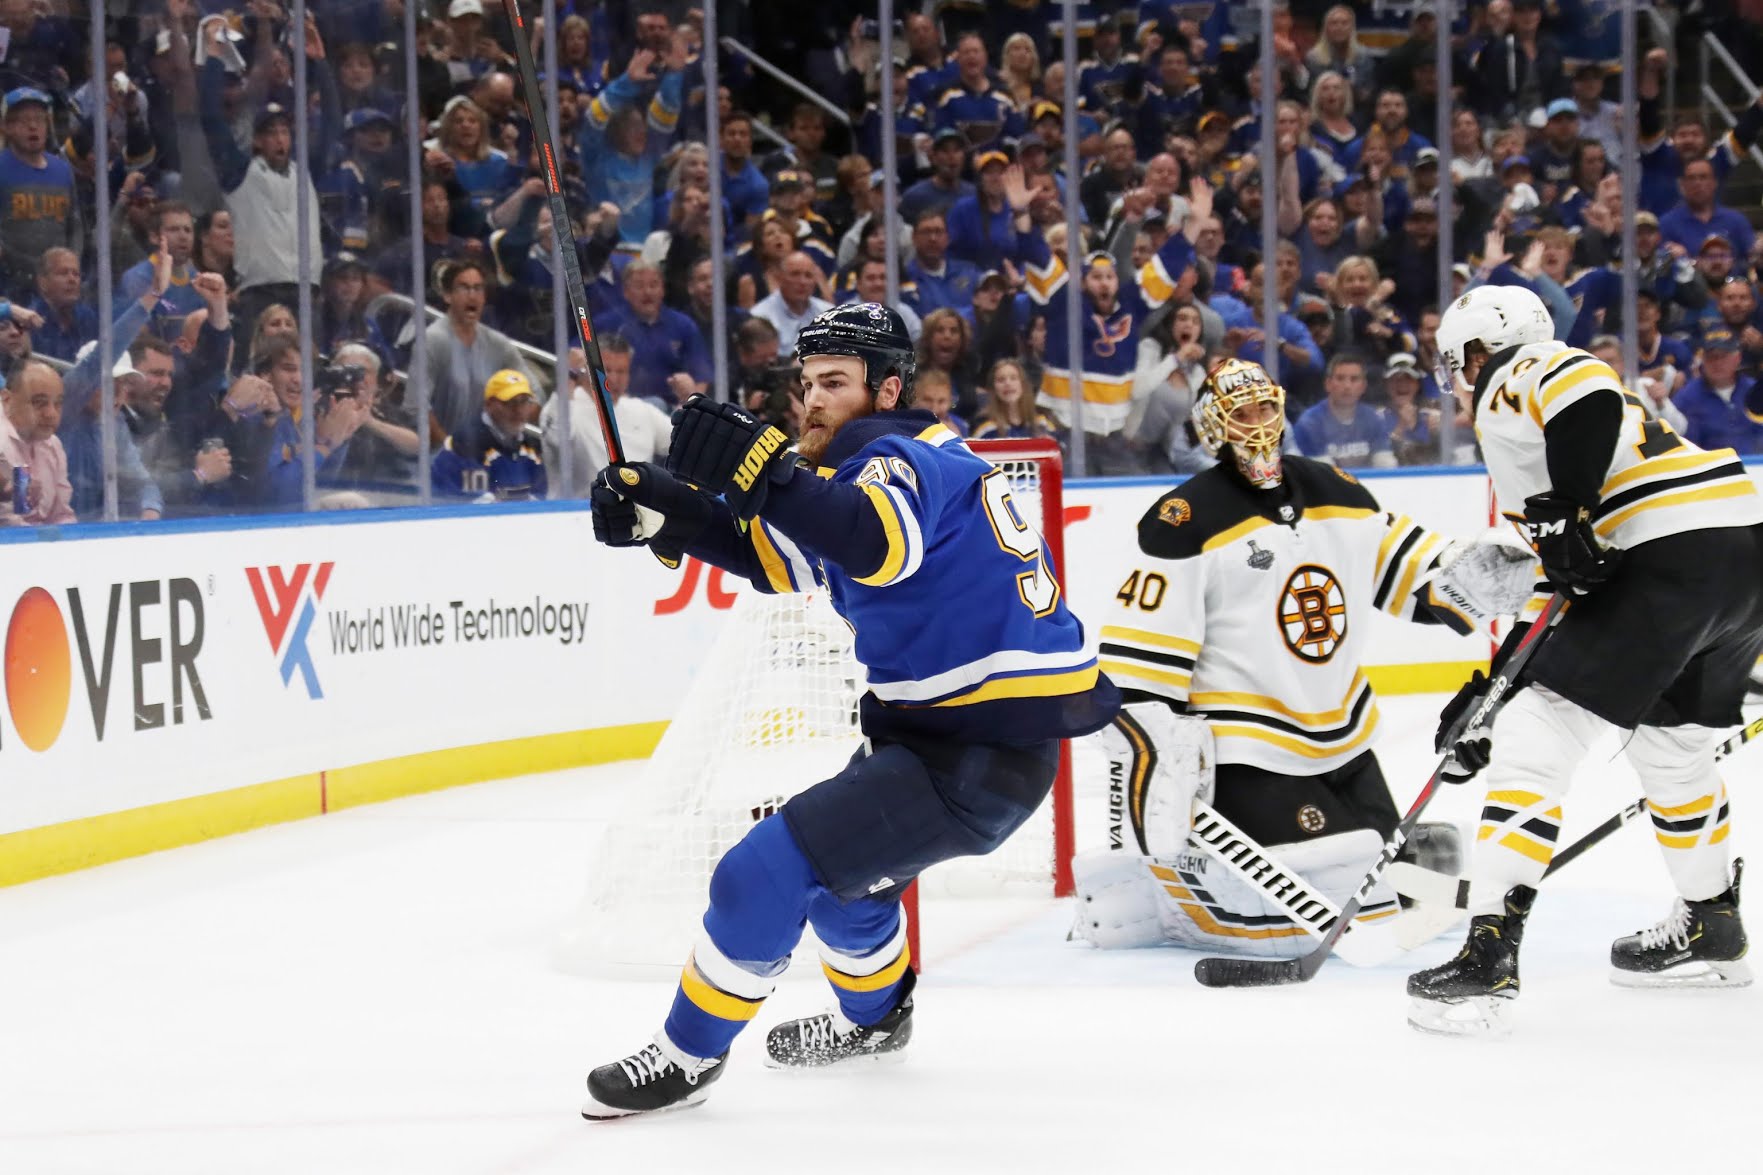 Stanley Cup Final : Blues pull one back again, hand Bruins 4-2 defeat to make it 2-2